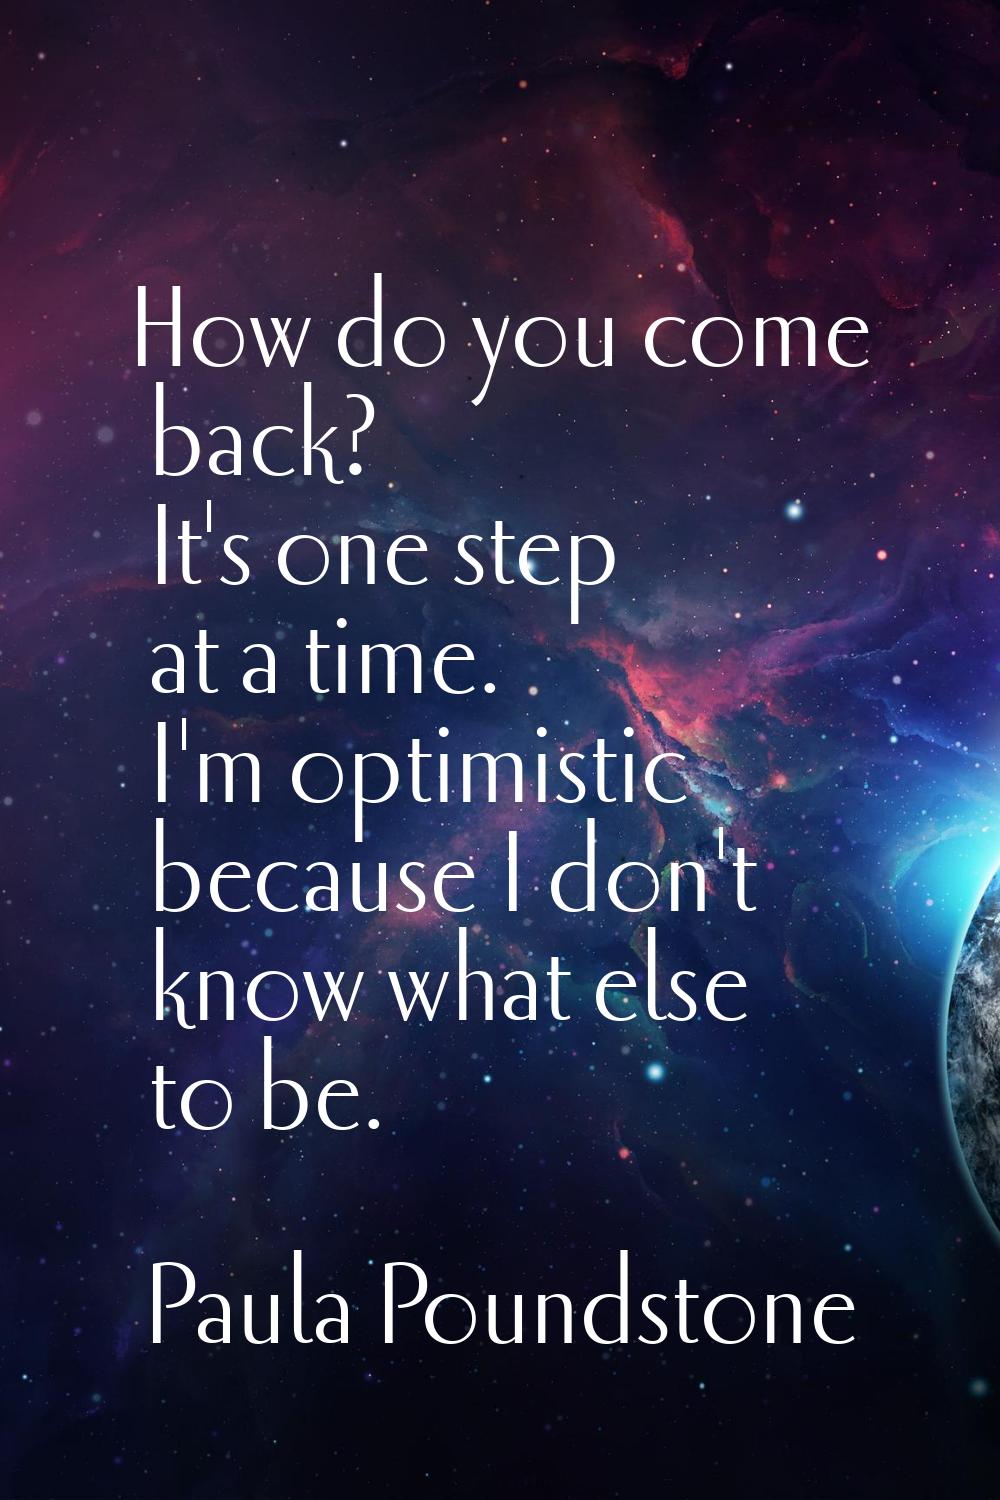 How do you come back? It's one step at a time. I'm optimistic because I don't know what else to be.